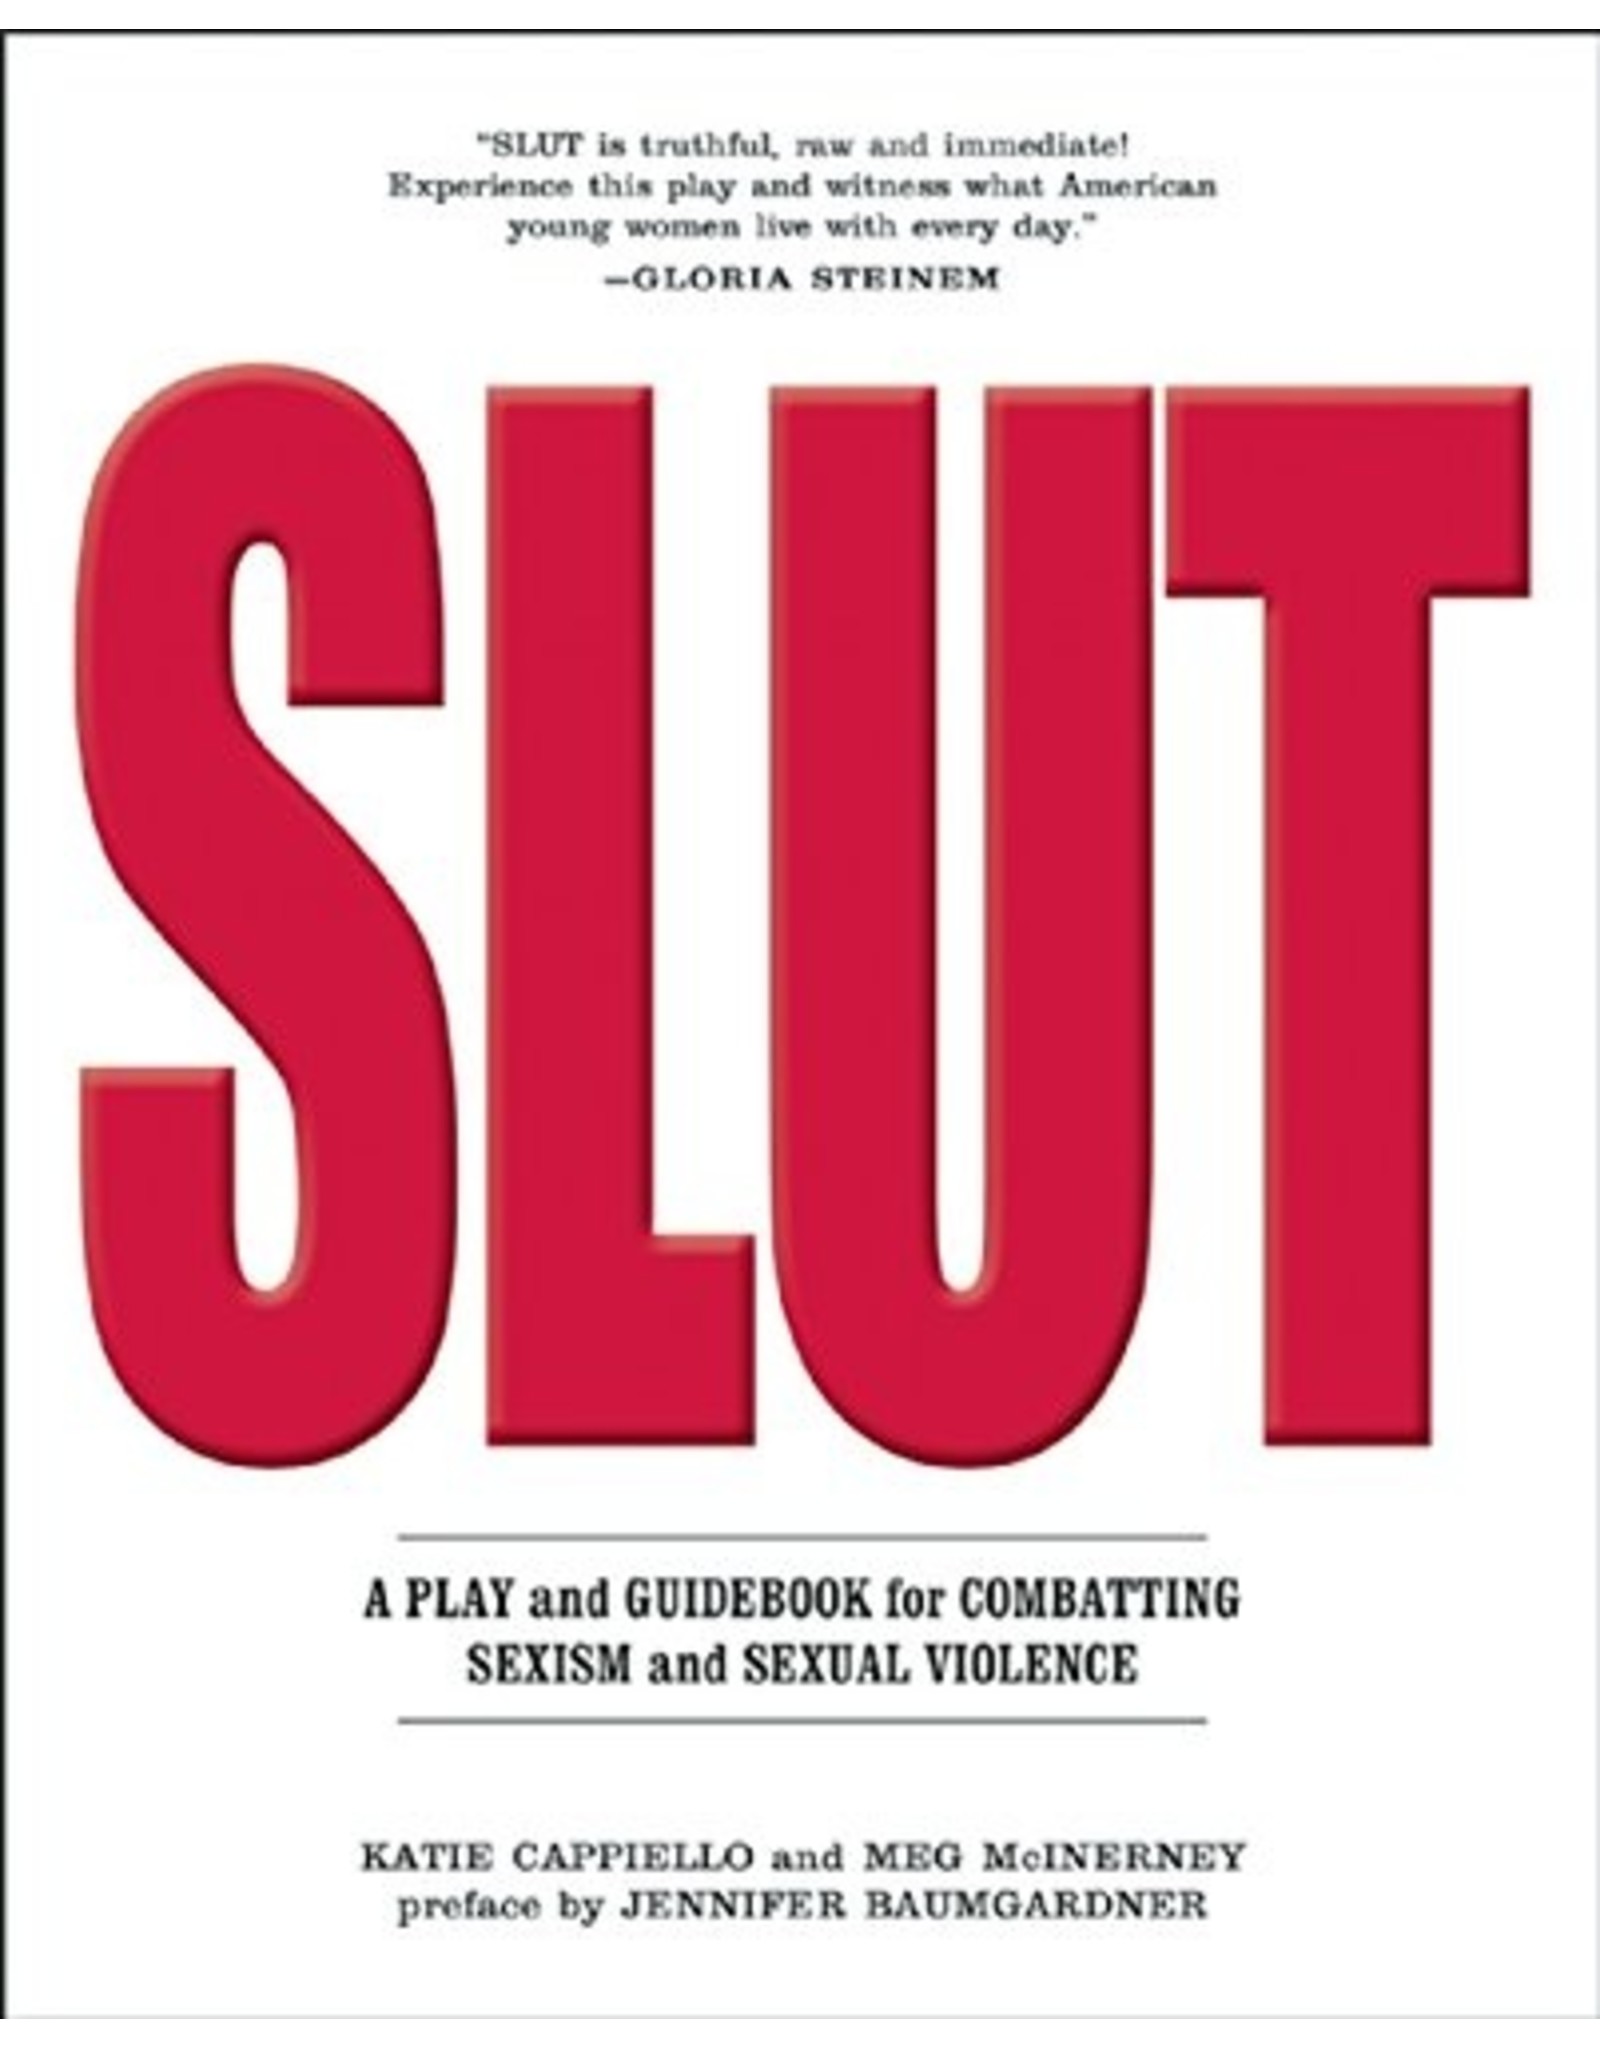 Literature SLUT: A Play and Guidebook for Combating Sexism and Sexual Violence